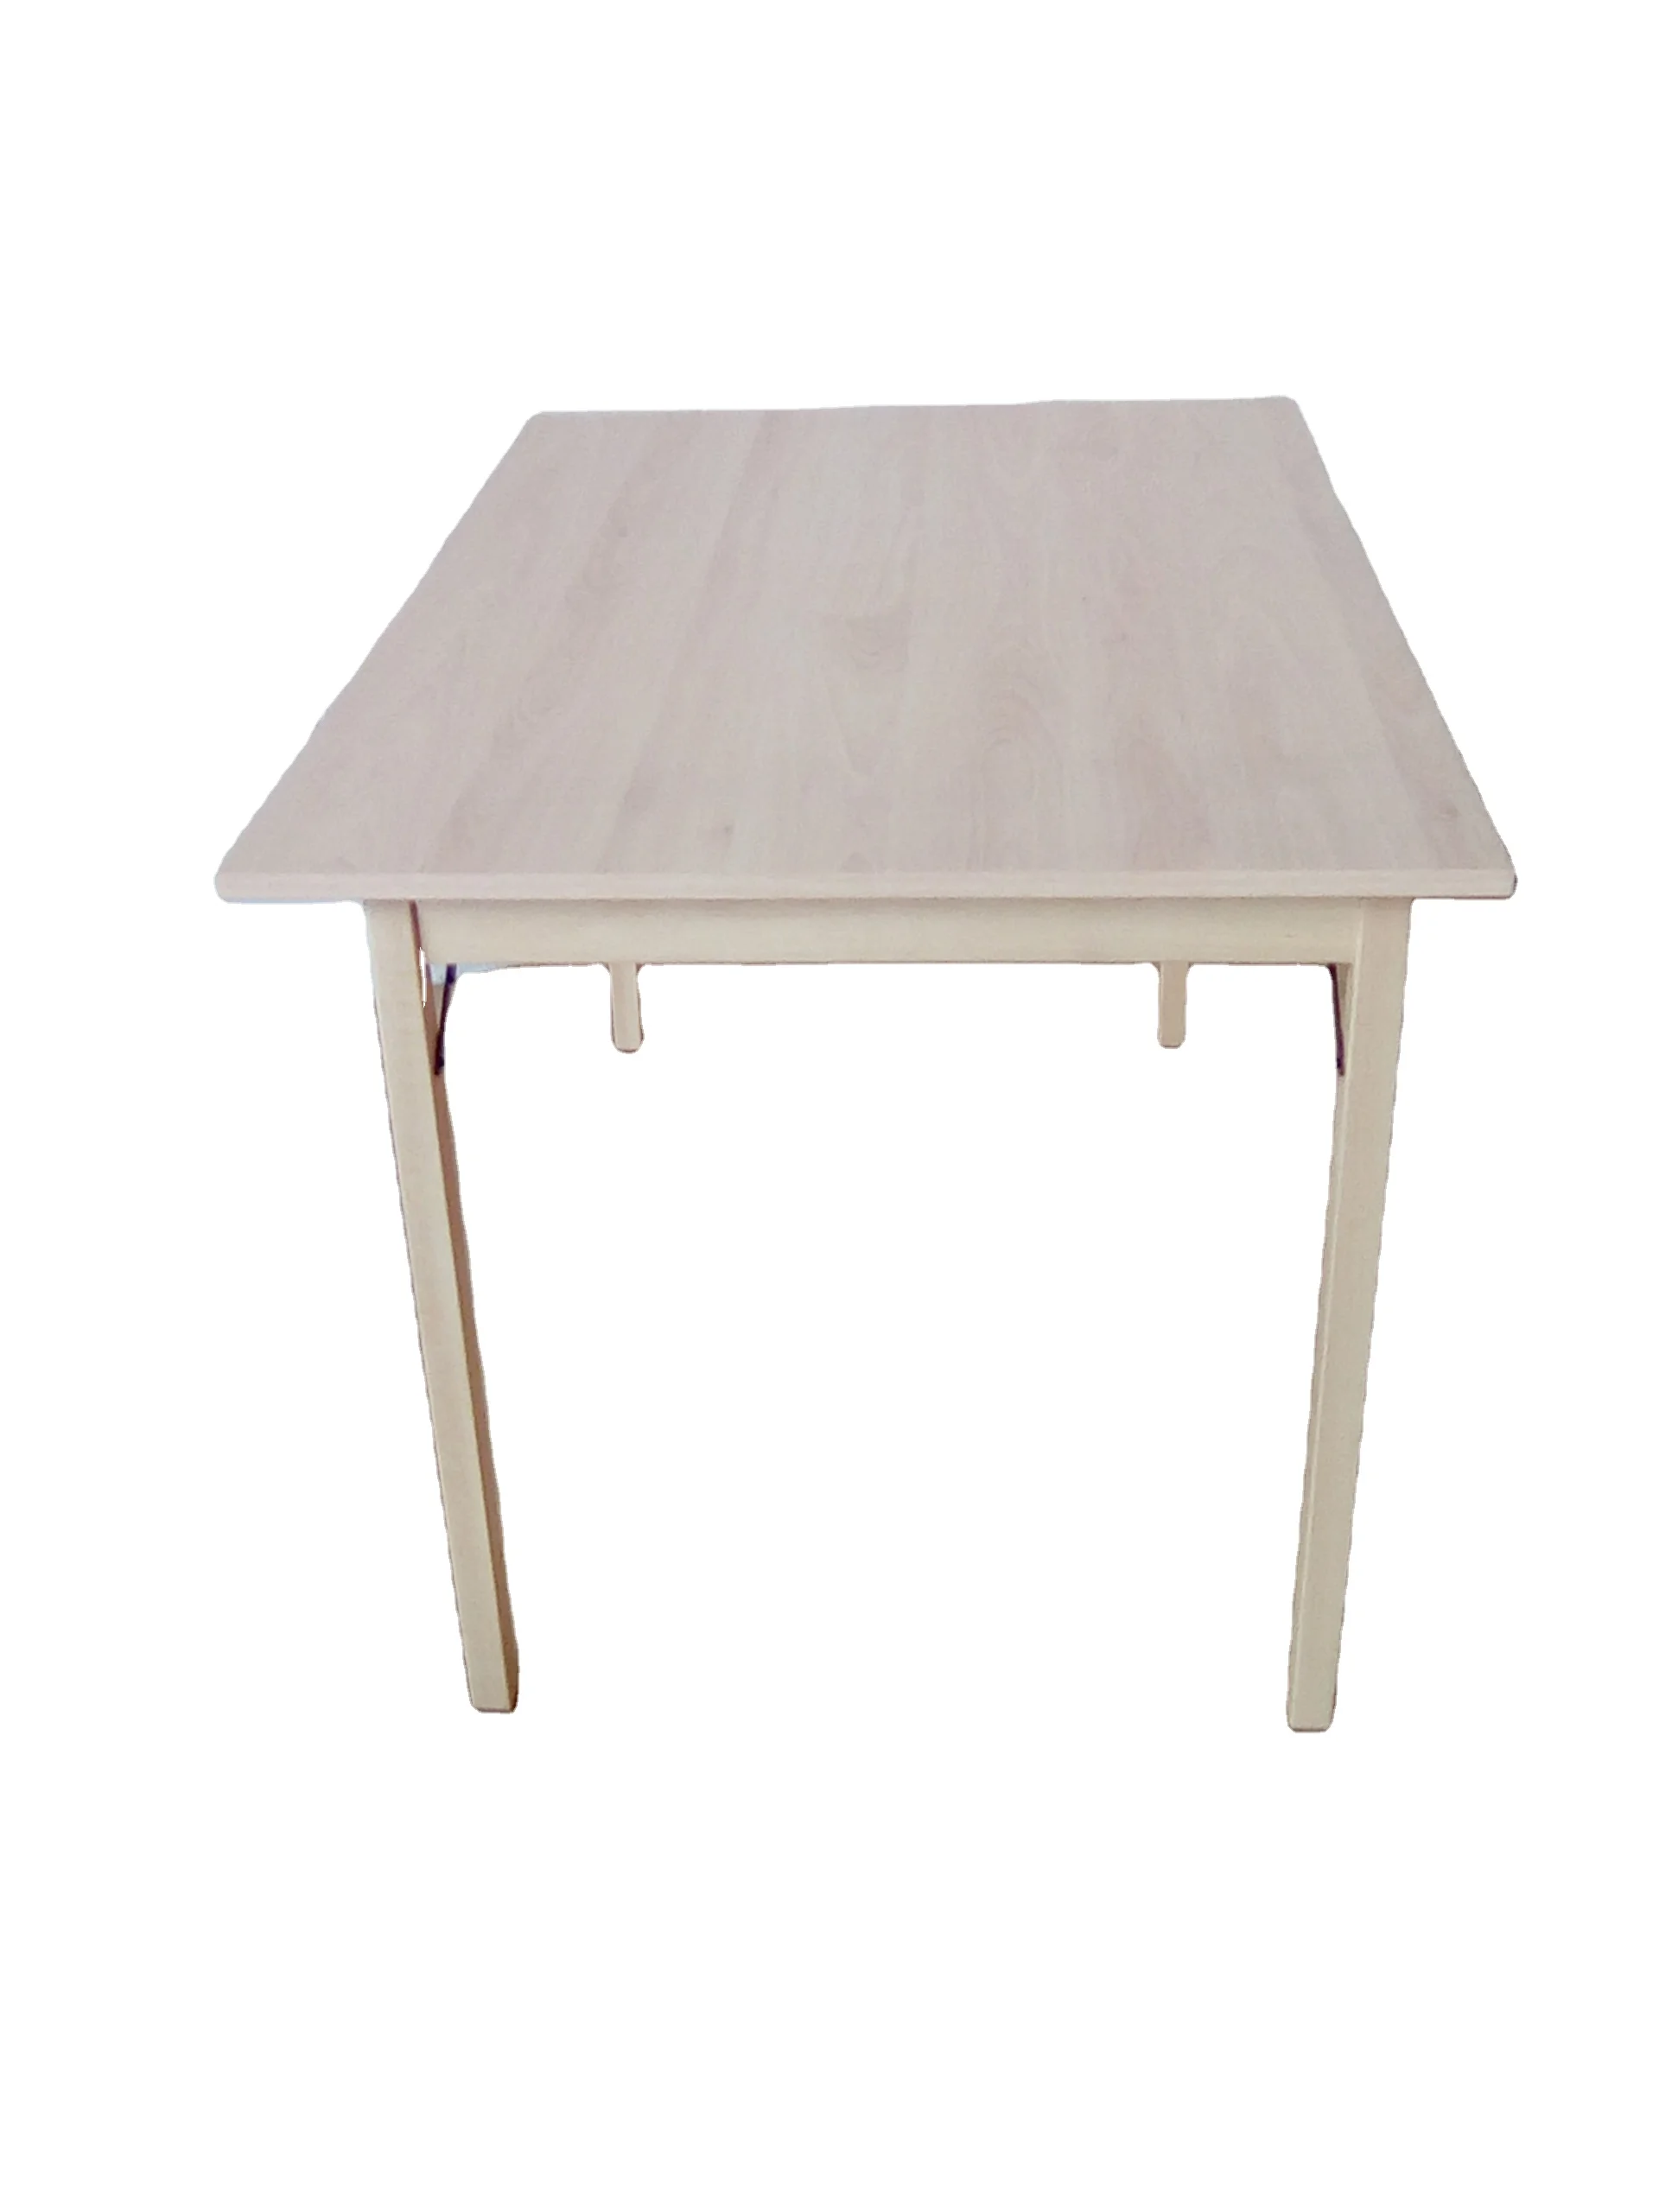 MADE IN ITALY WOODEN FOLDING DINING TABLE ITALO